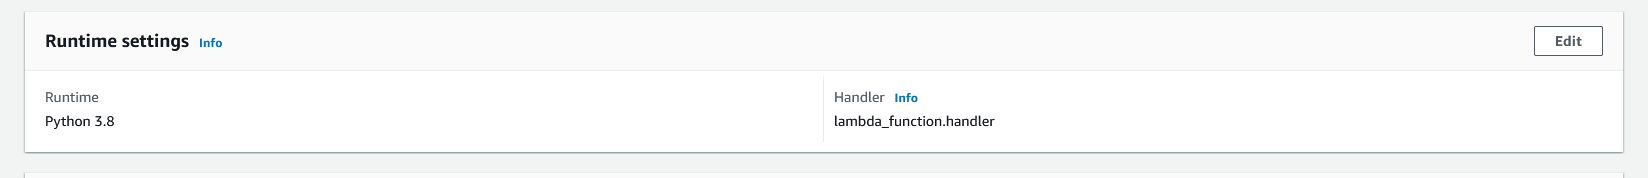 Runtime settings section with runtime set to Python 3.8 and handler set to lambda_function.handler